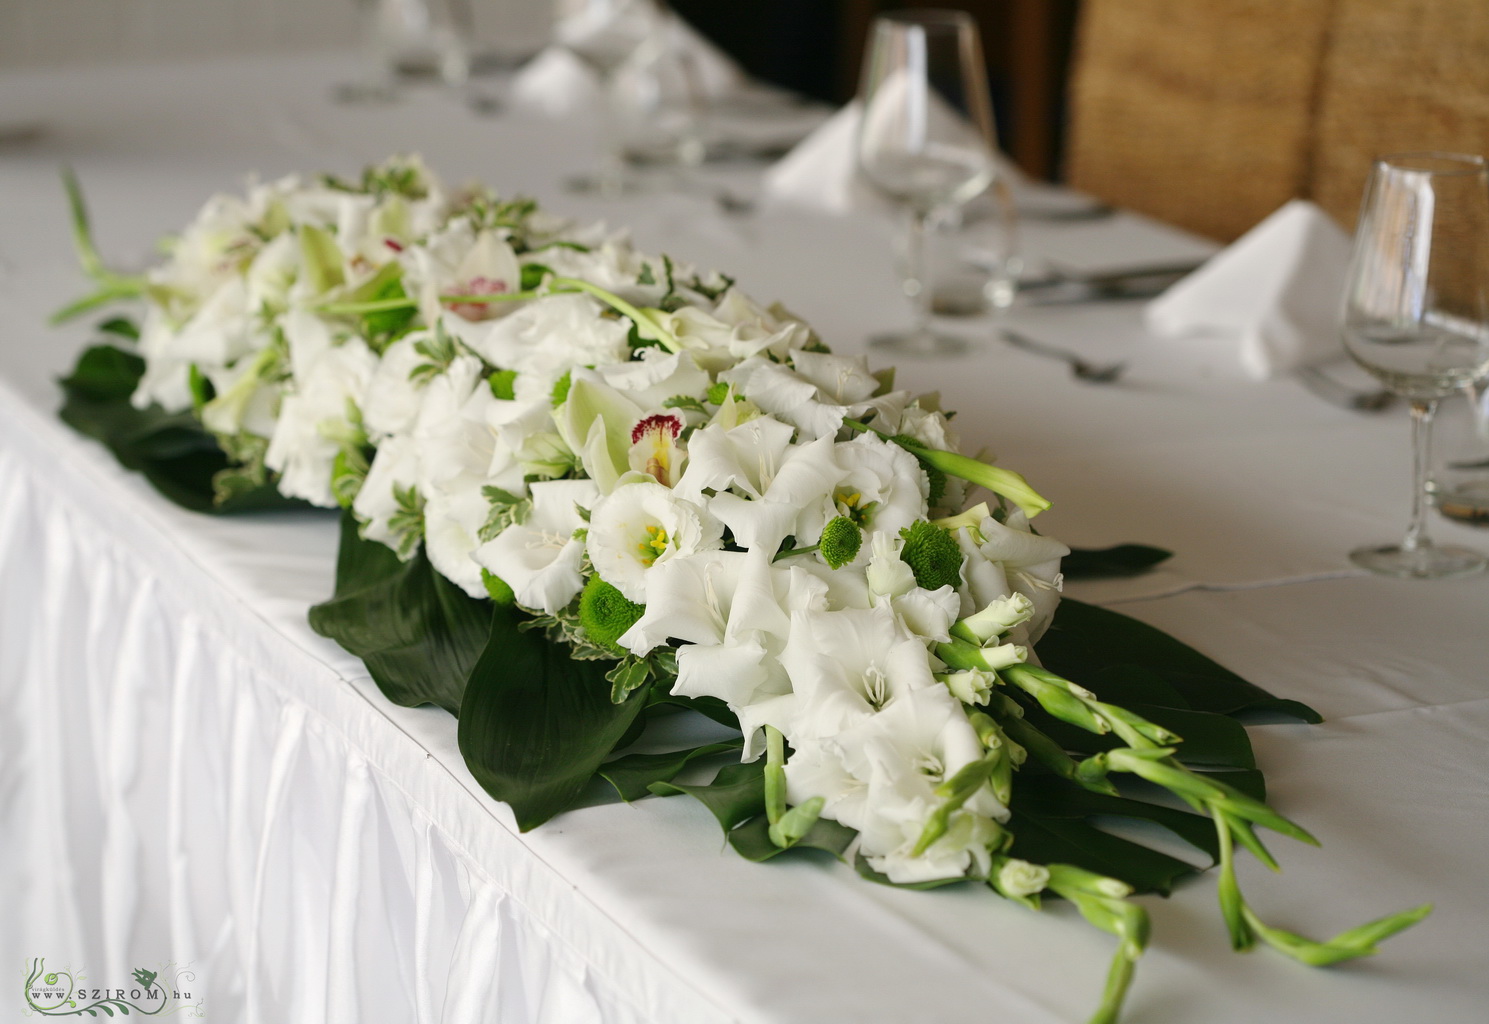 flower delivery Budapest - Main table centerpiece Hemingway Budapest (orchid, gladiolus, cala, button chrysanthemum, white, green), wedding